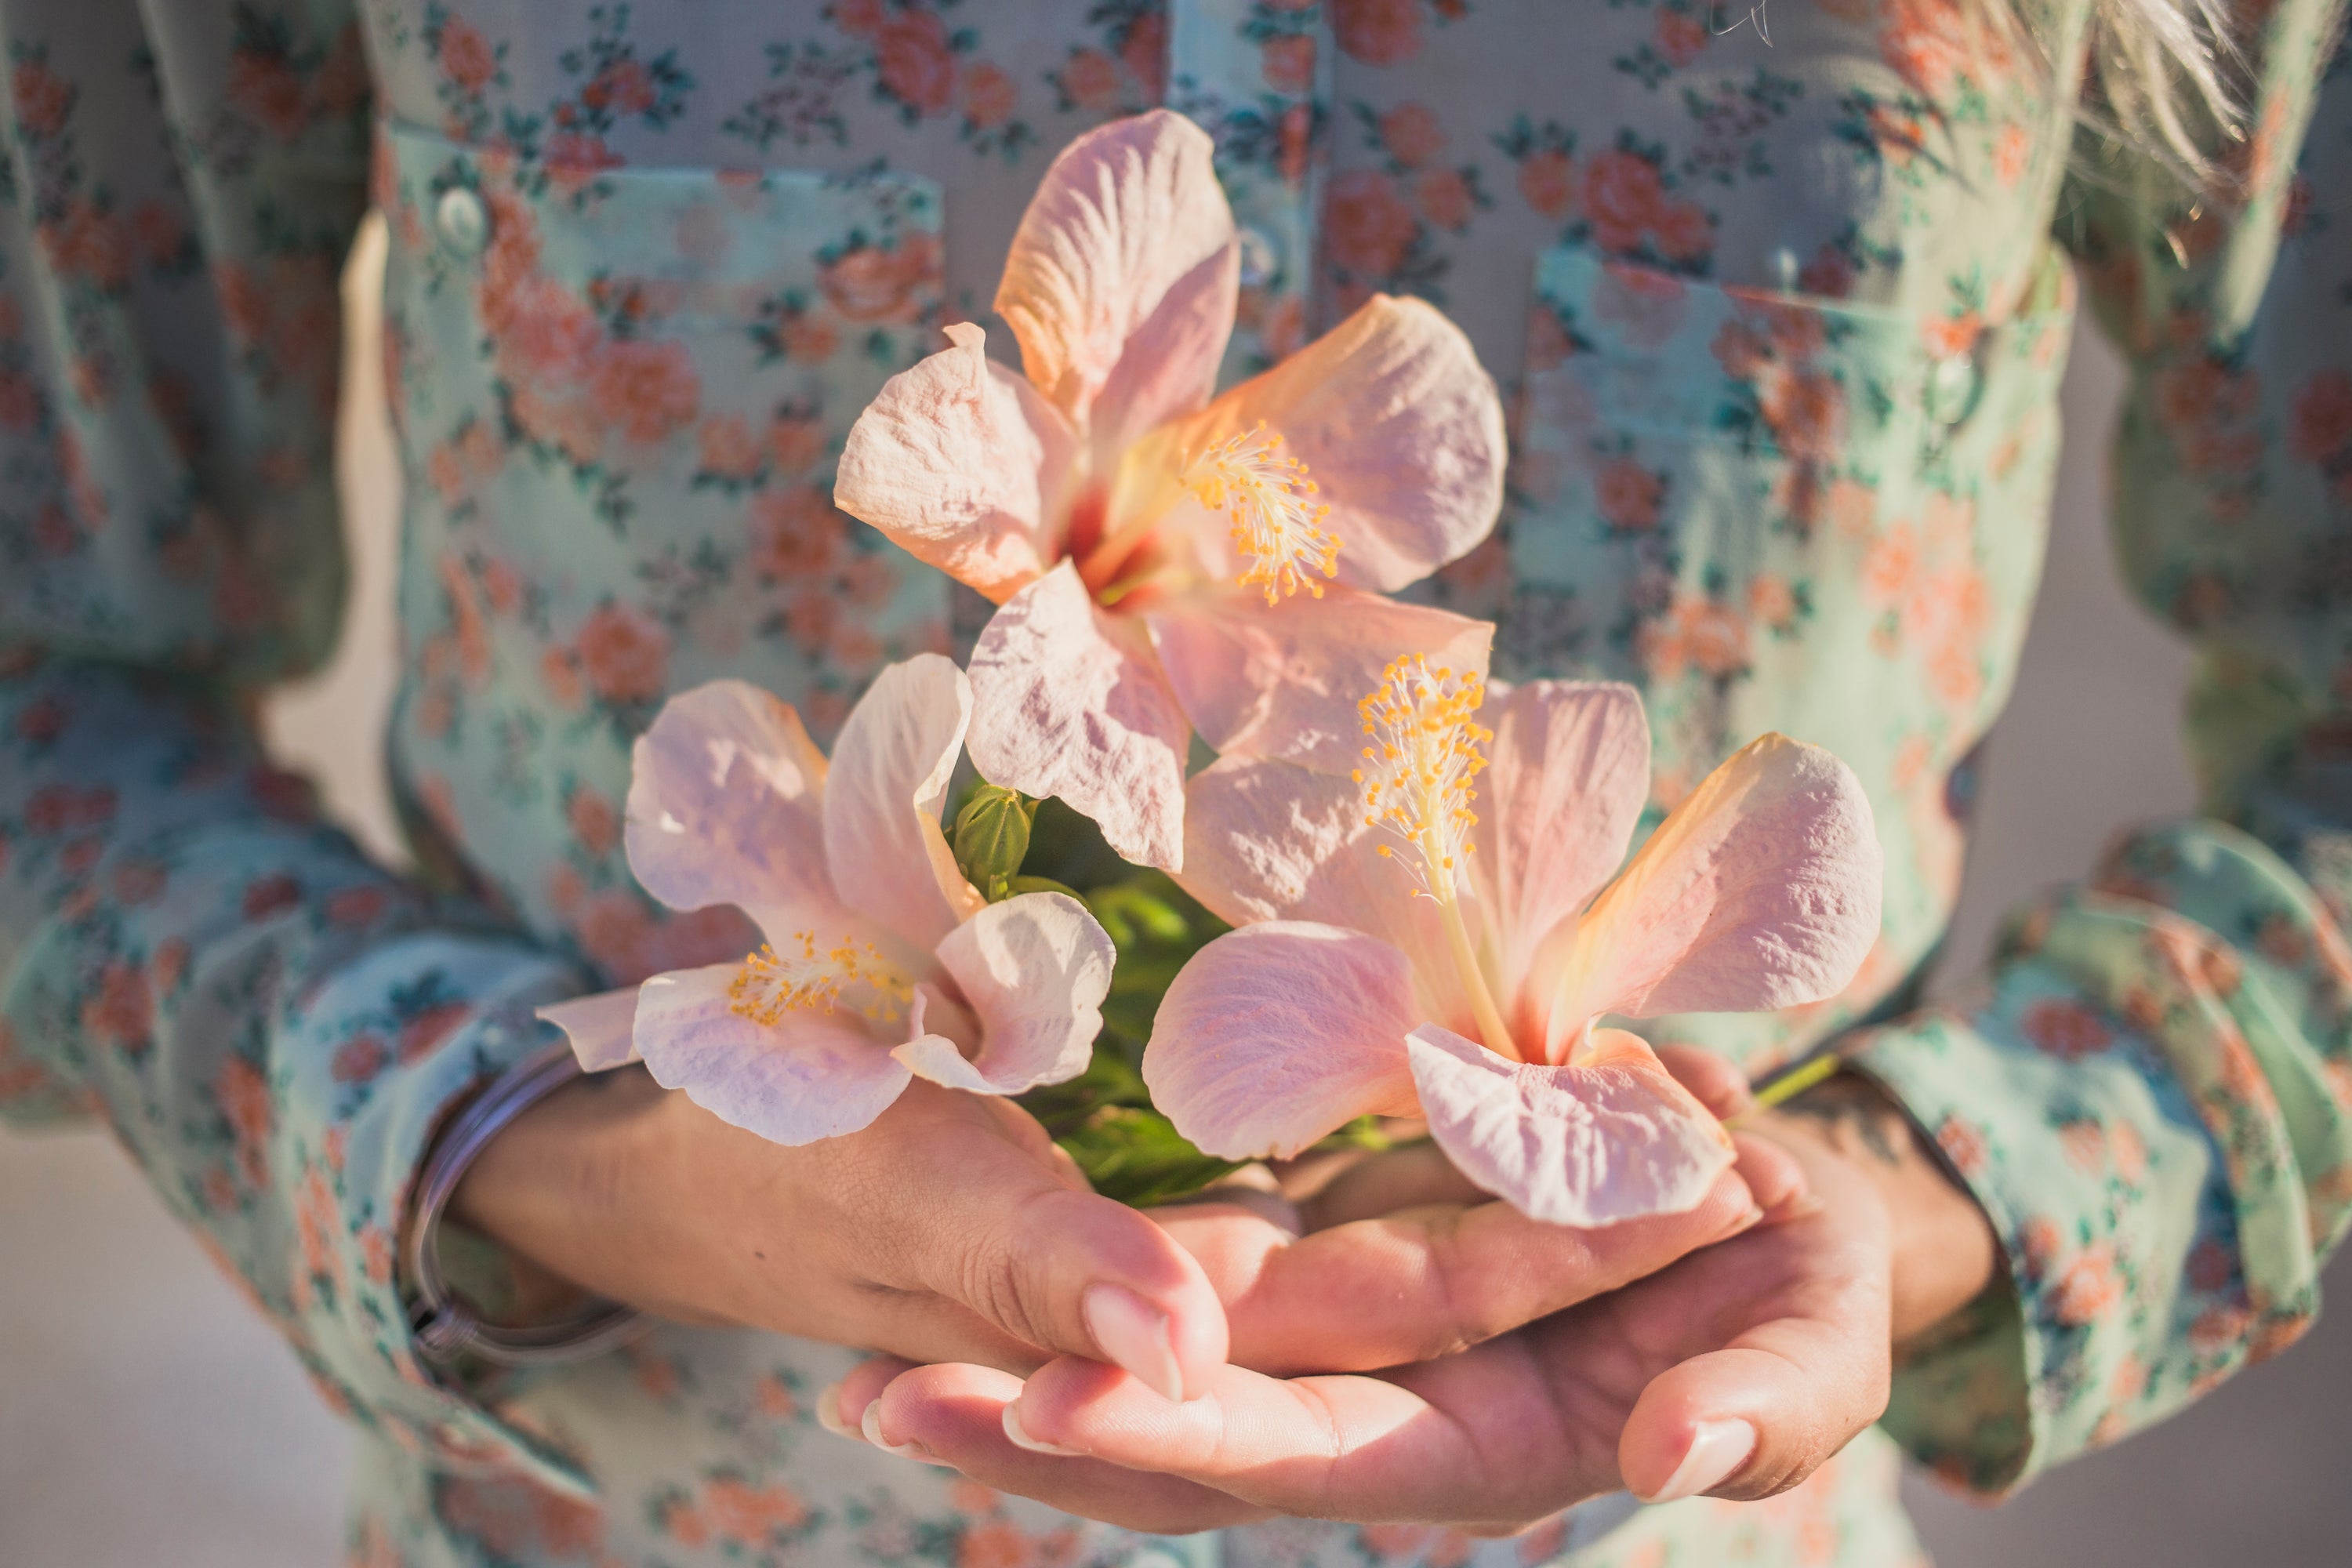 Flower Meditation: Mindfulness Practices for Connecting with Nature